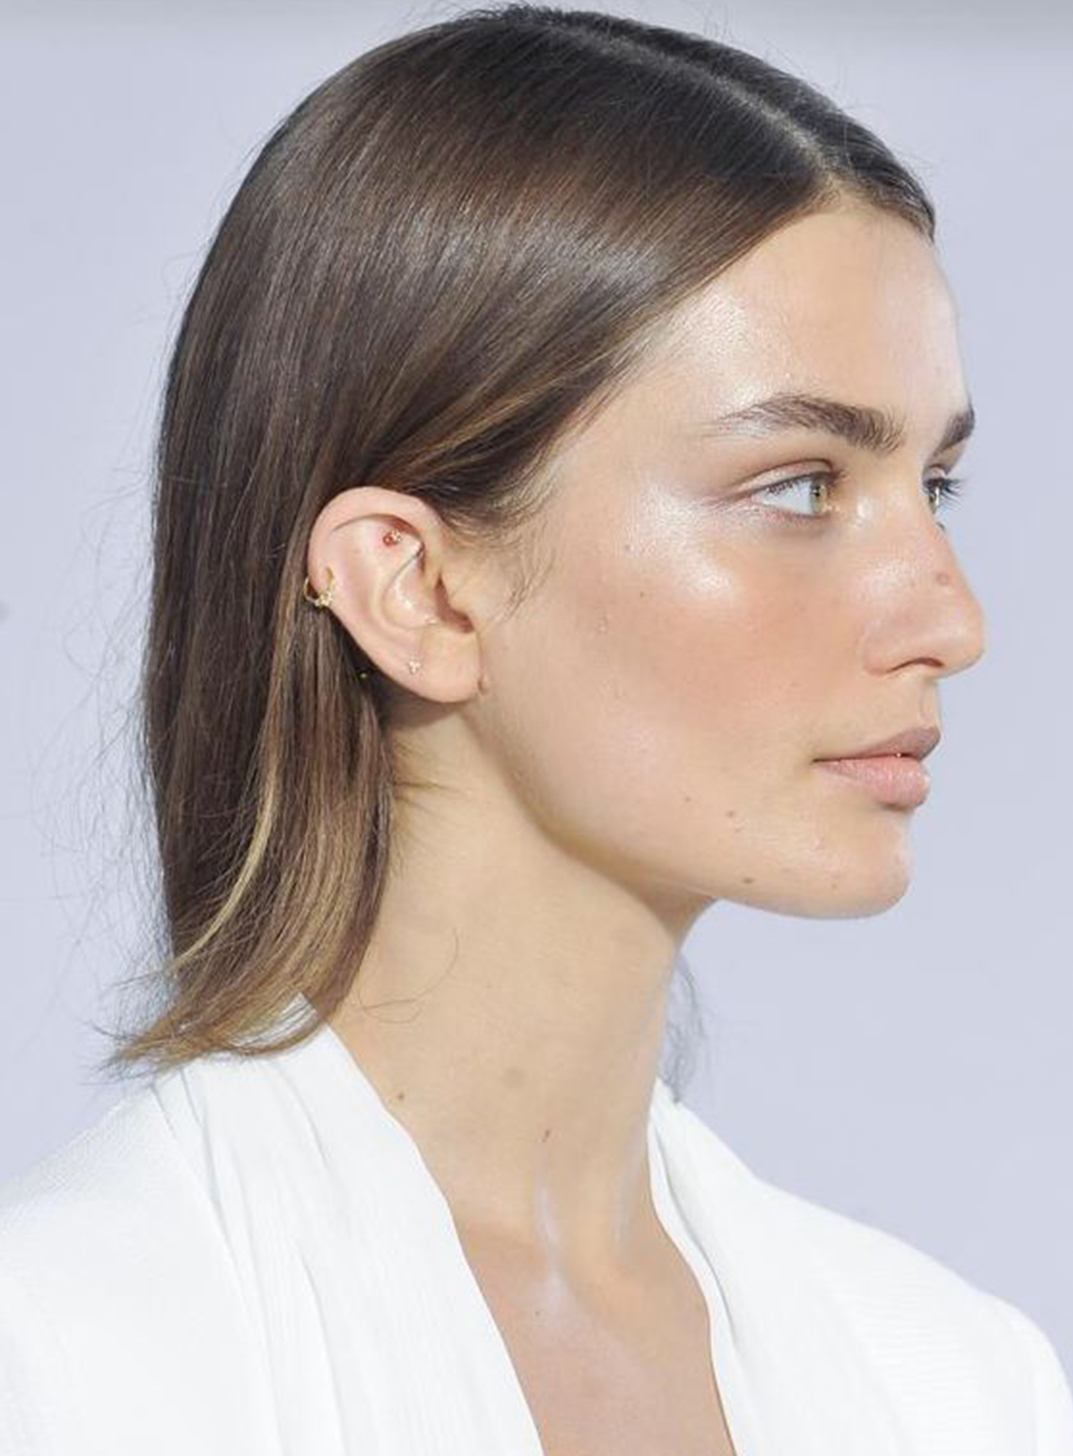 how to match your foundation shade online